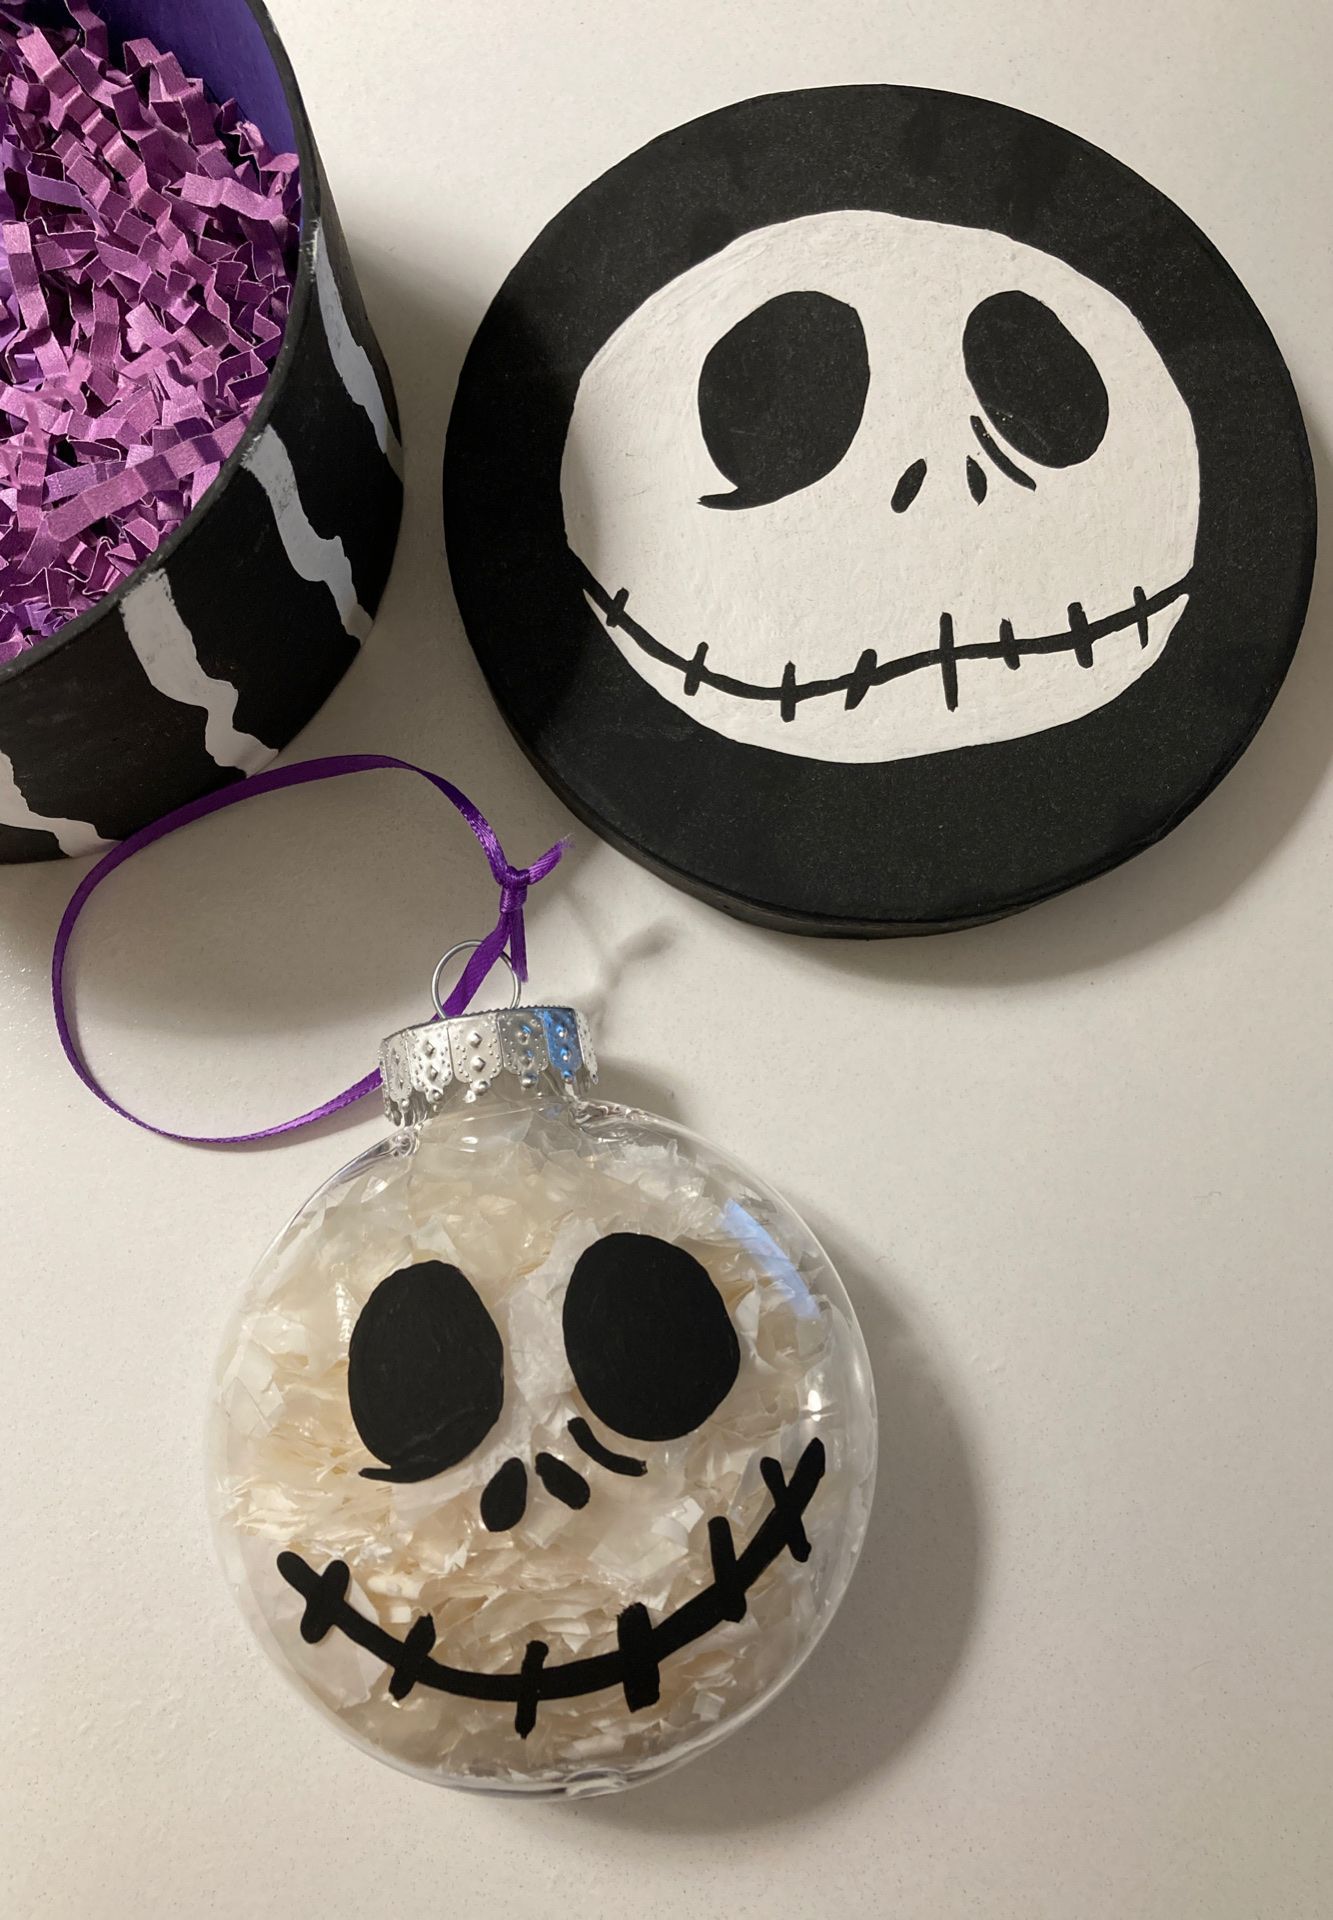 Nightmare Before Christmas - Jack Skellington Christmas Tree Ornament in a one-of-a-kind box